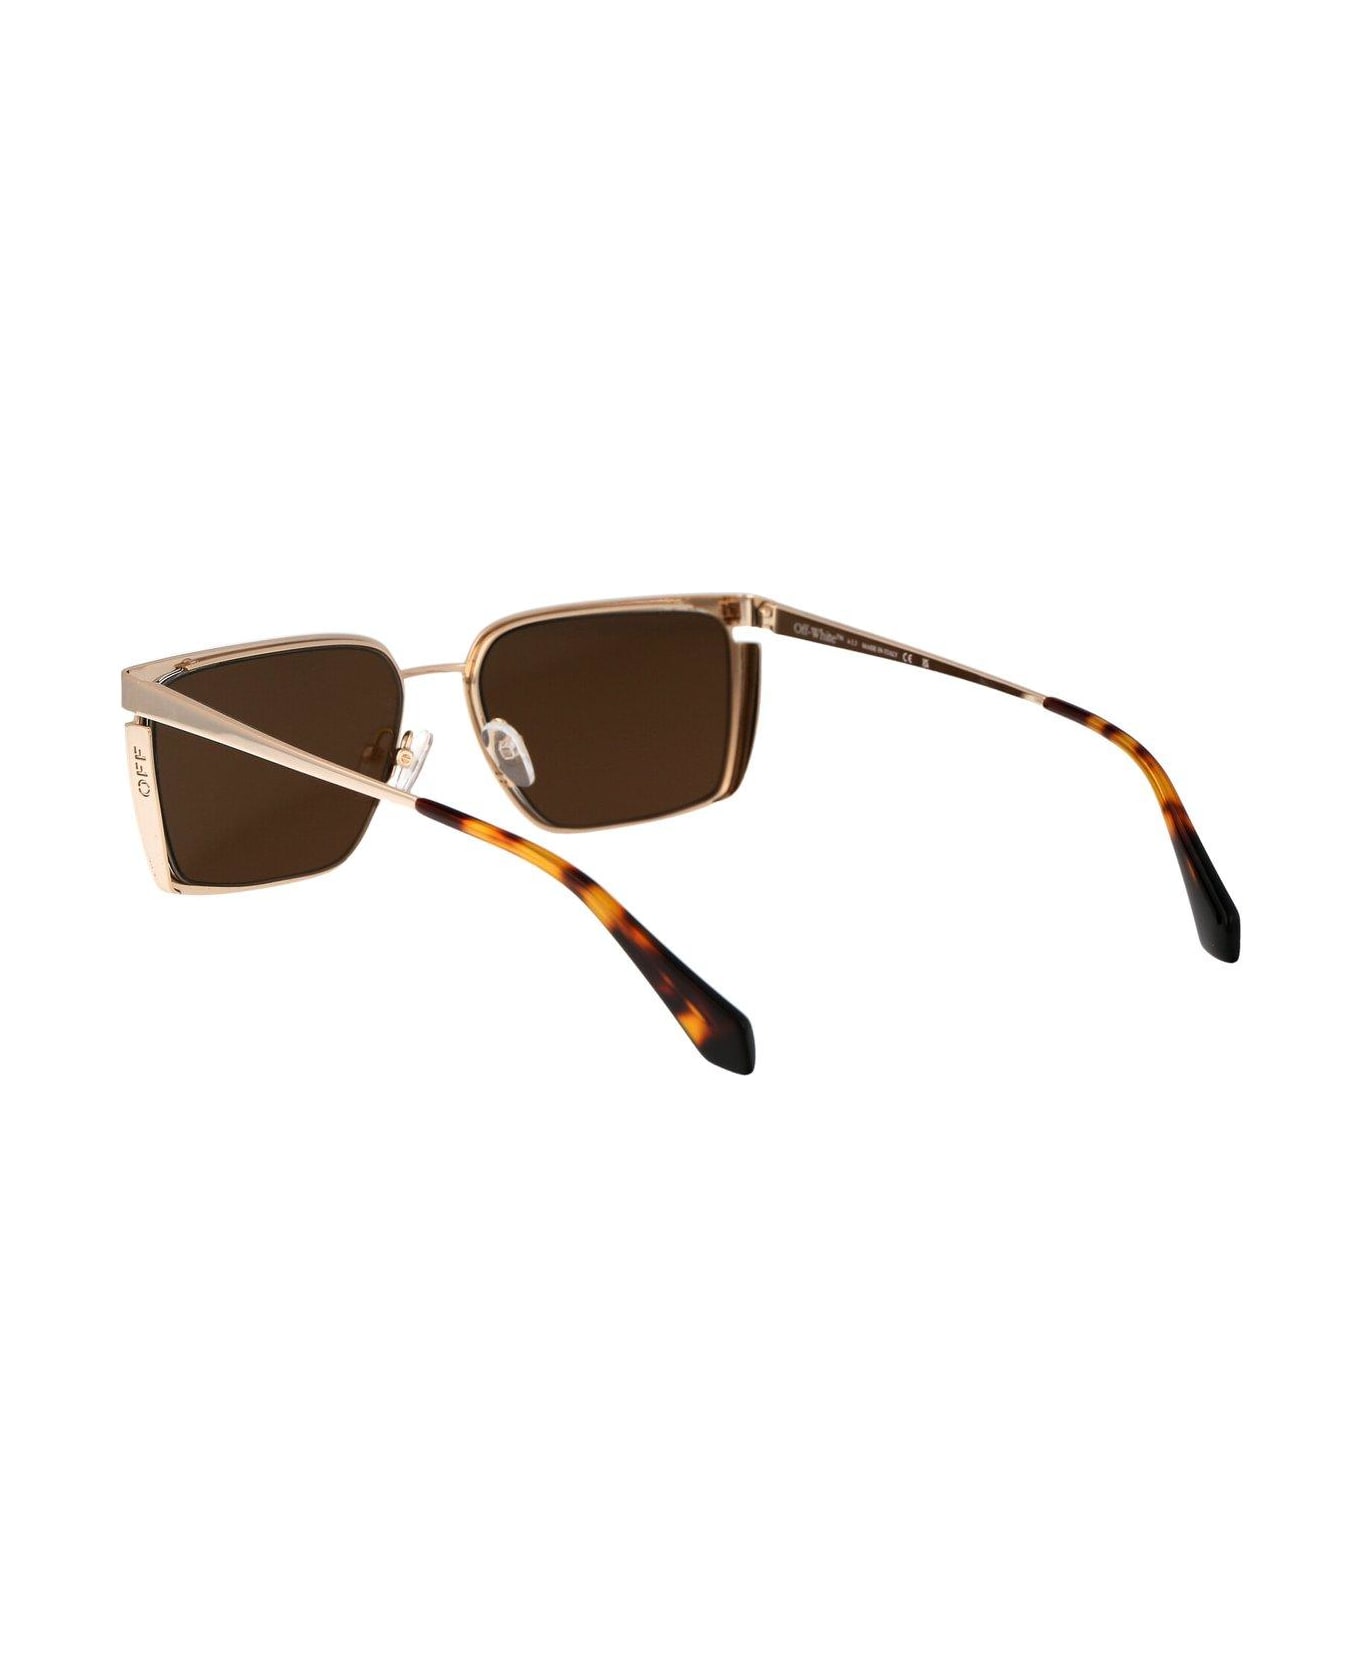 Off-White Yoder Sunglasses - 7676 GOLD GOLD